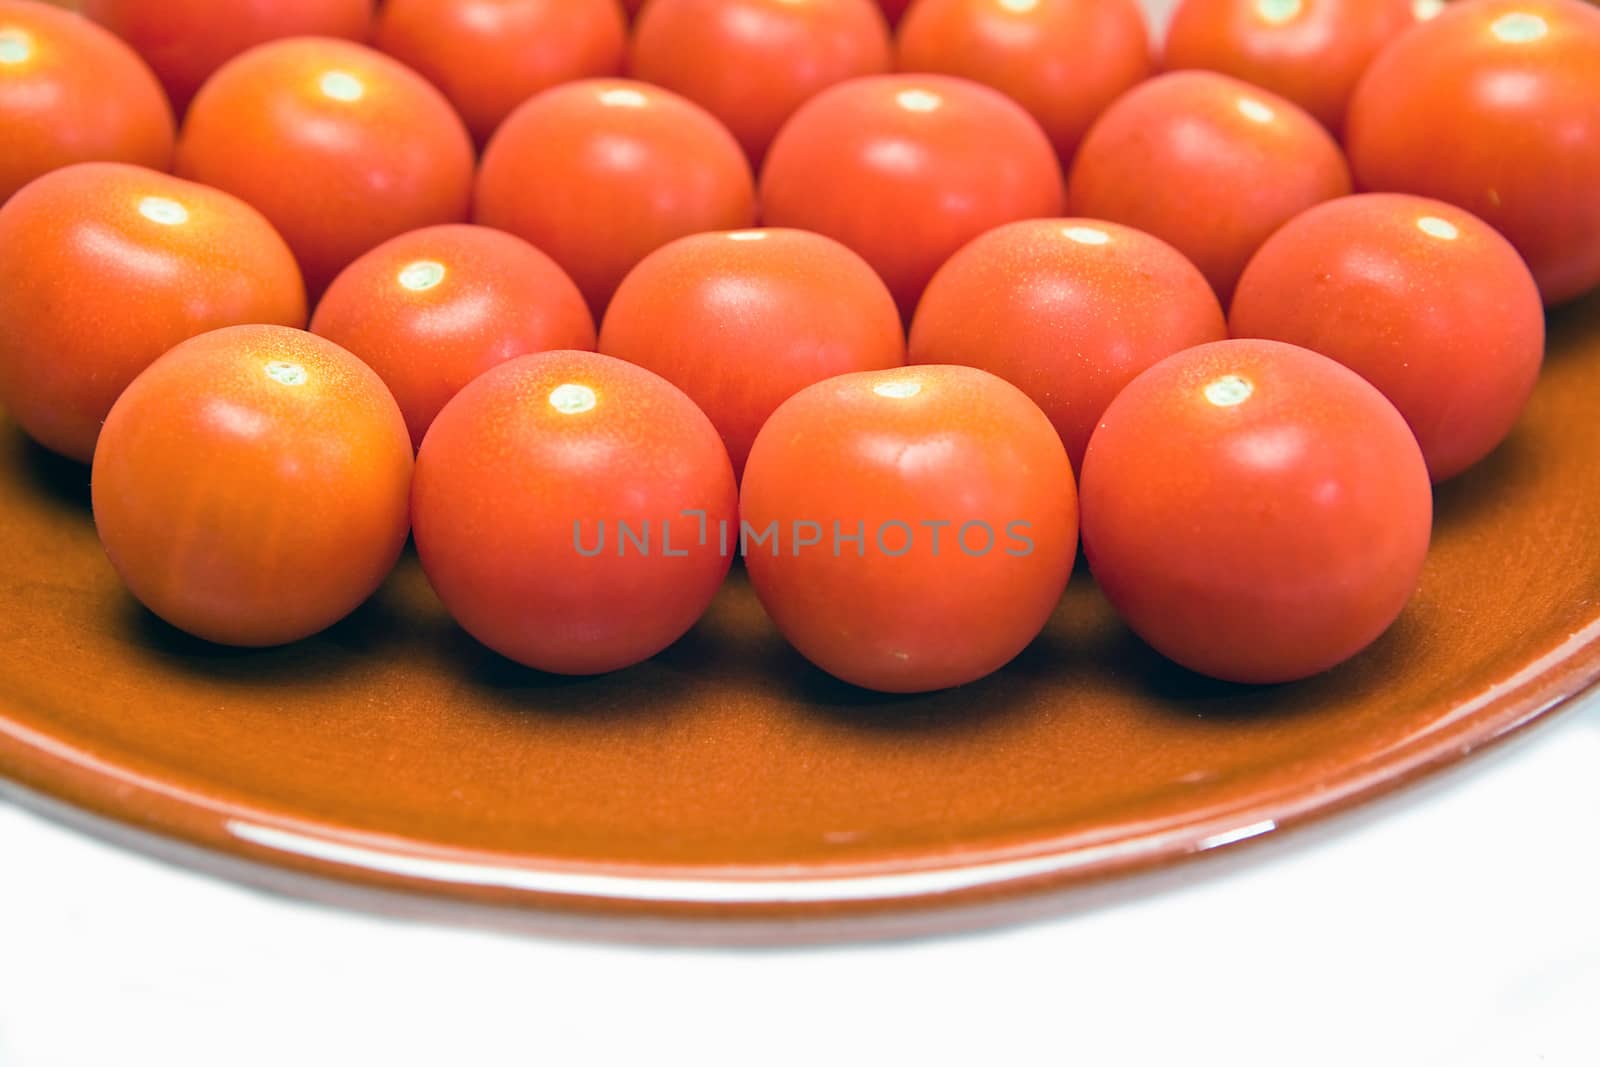 Cherry tomatoes on a ceramic bowl